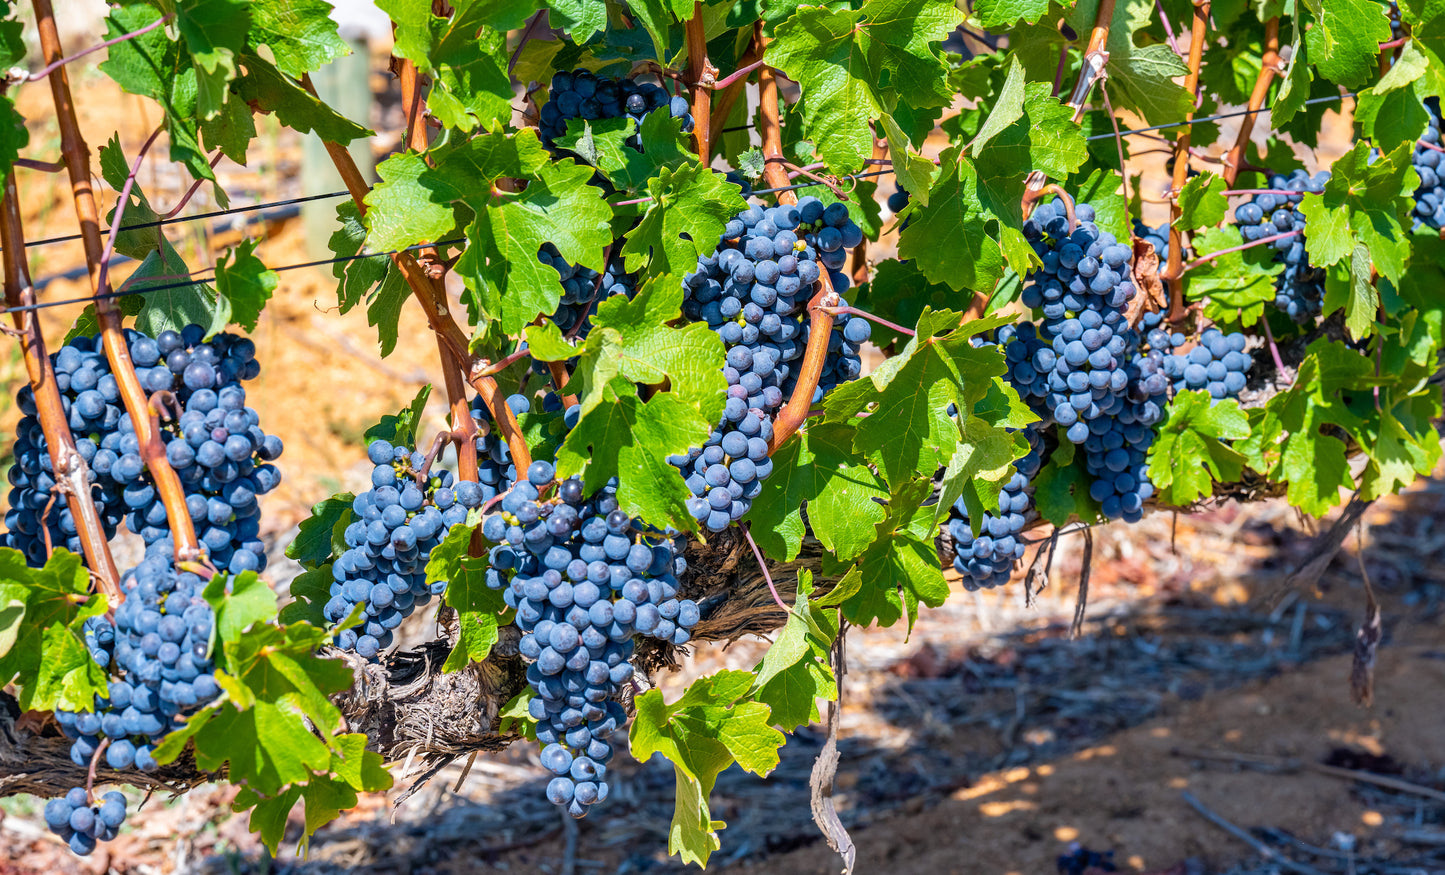 What to know about South Africa’s red varietal: The Pinotage